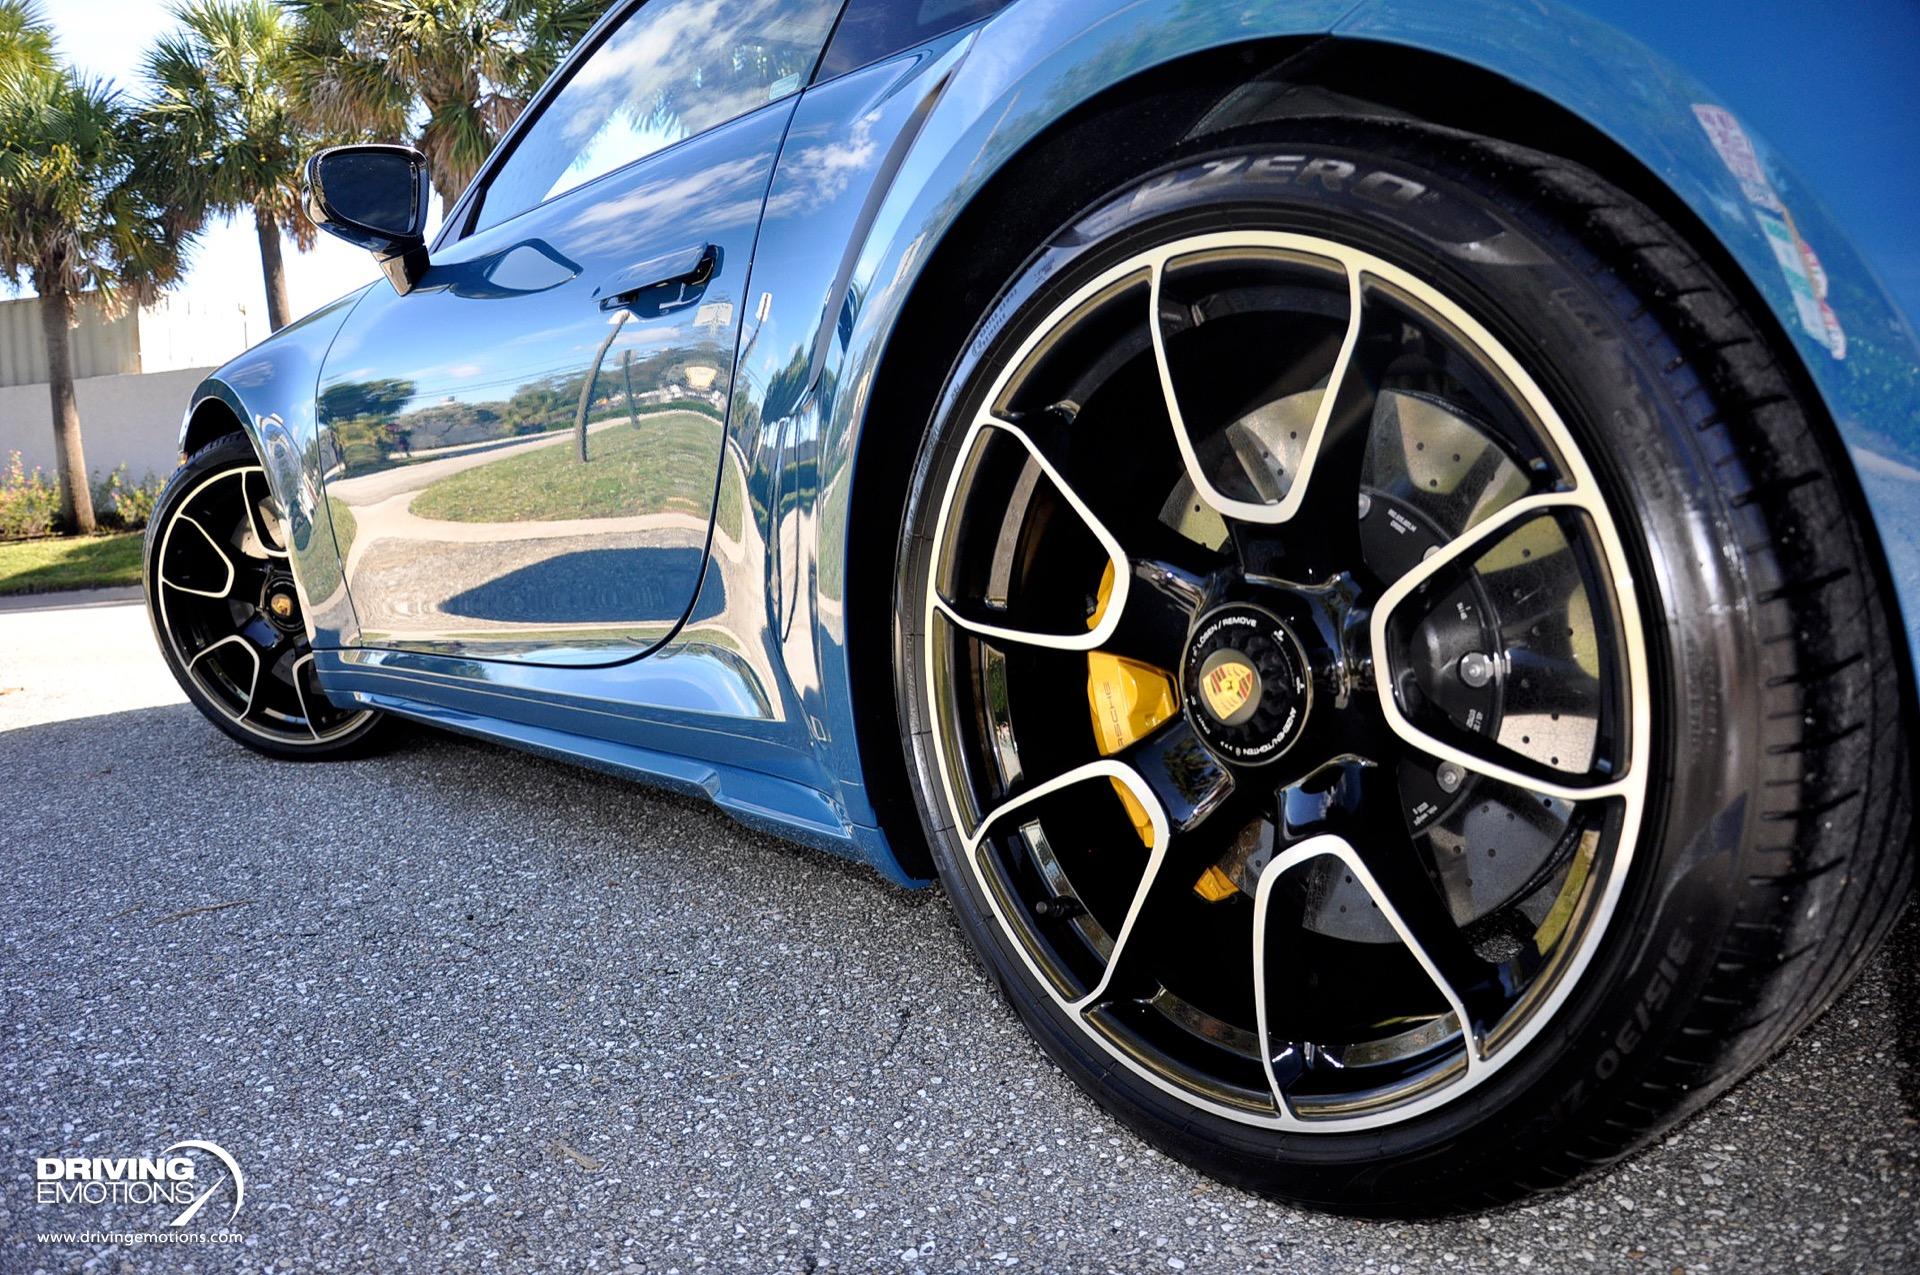 Used 2022 Porsche 911 Turbo S Coupe Turbo S PAINT TO SAMPLE OSLO BLUE! SPECIAL WISHES INTERIOR! RARE!! | Lake Park, FL